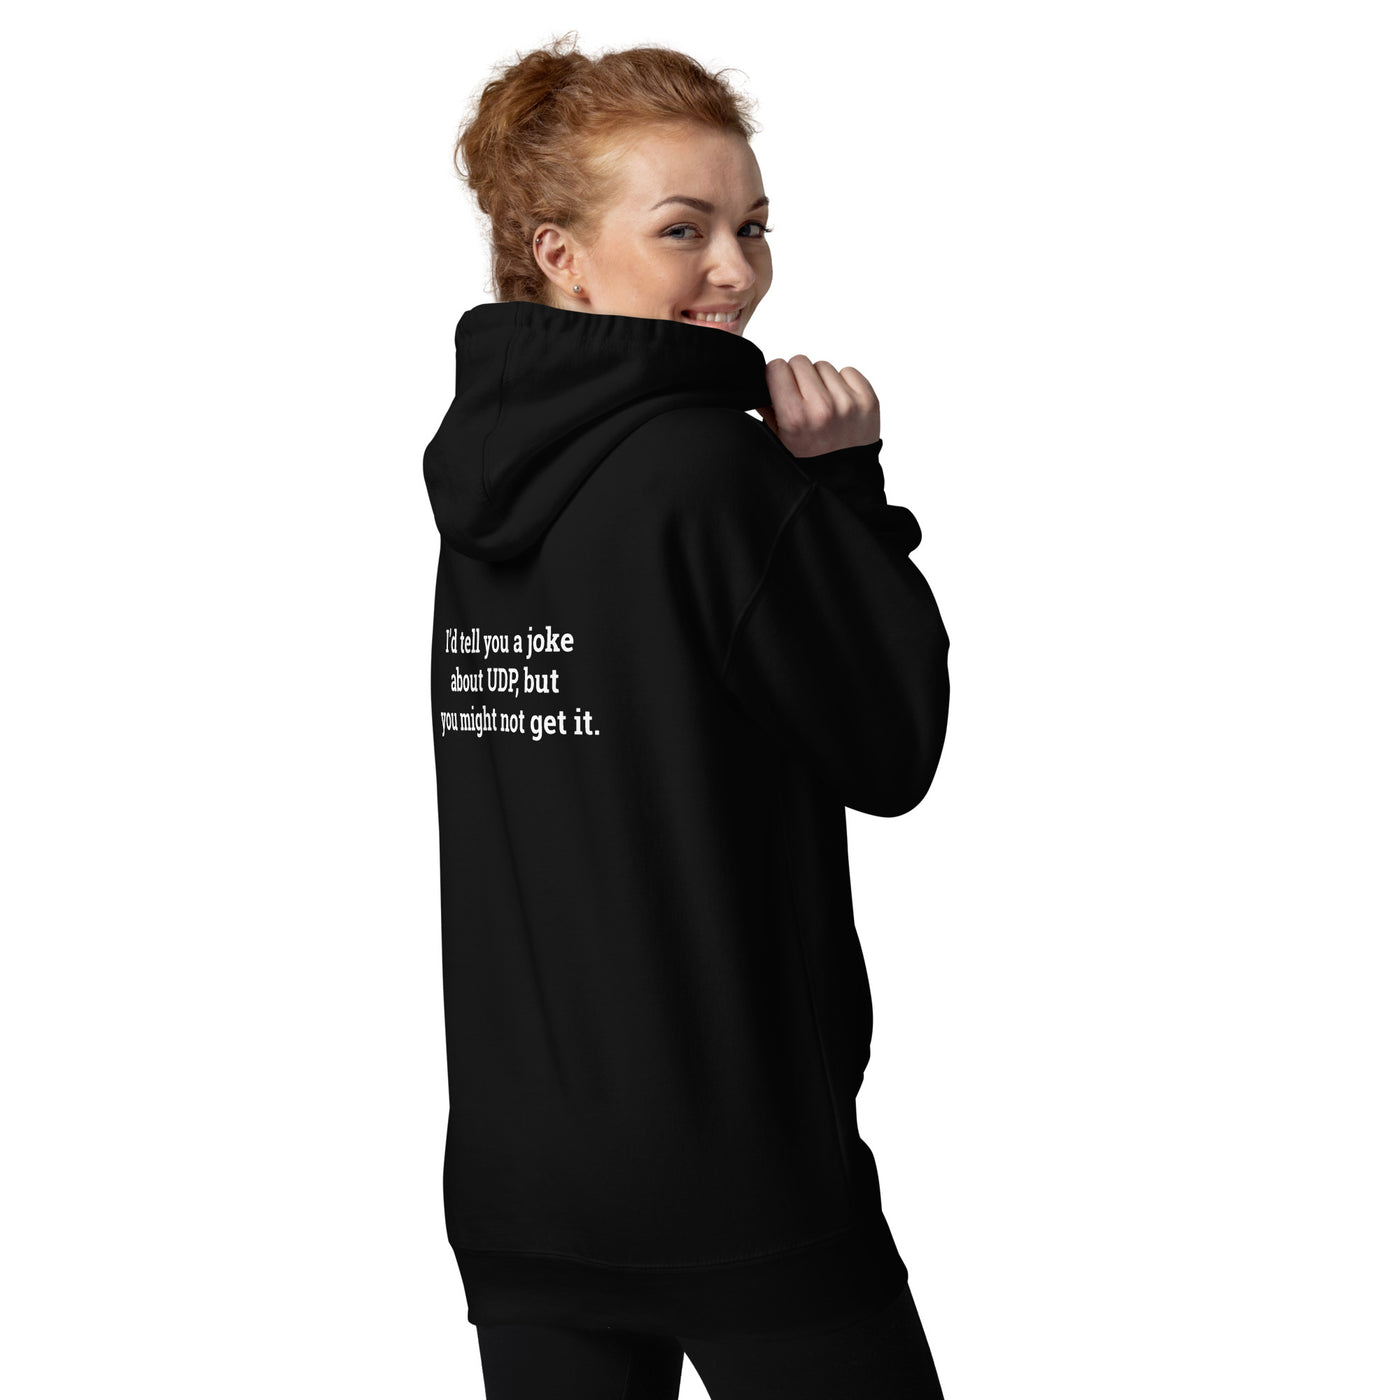 I'd tell you a joke about UDP, but you might not get it V2 - Unisex Hoodie